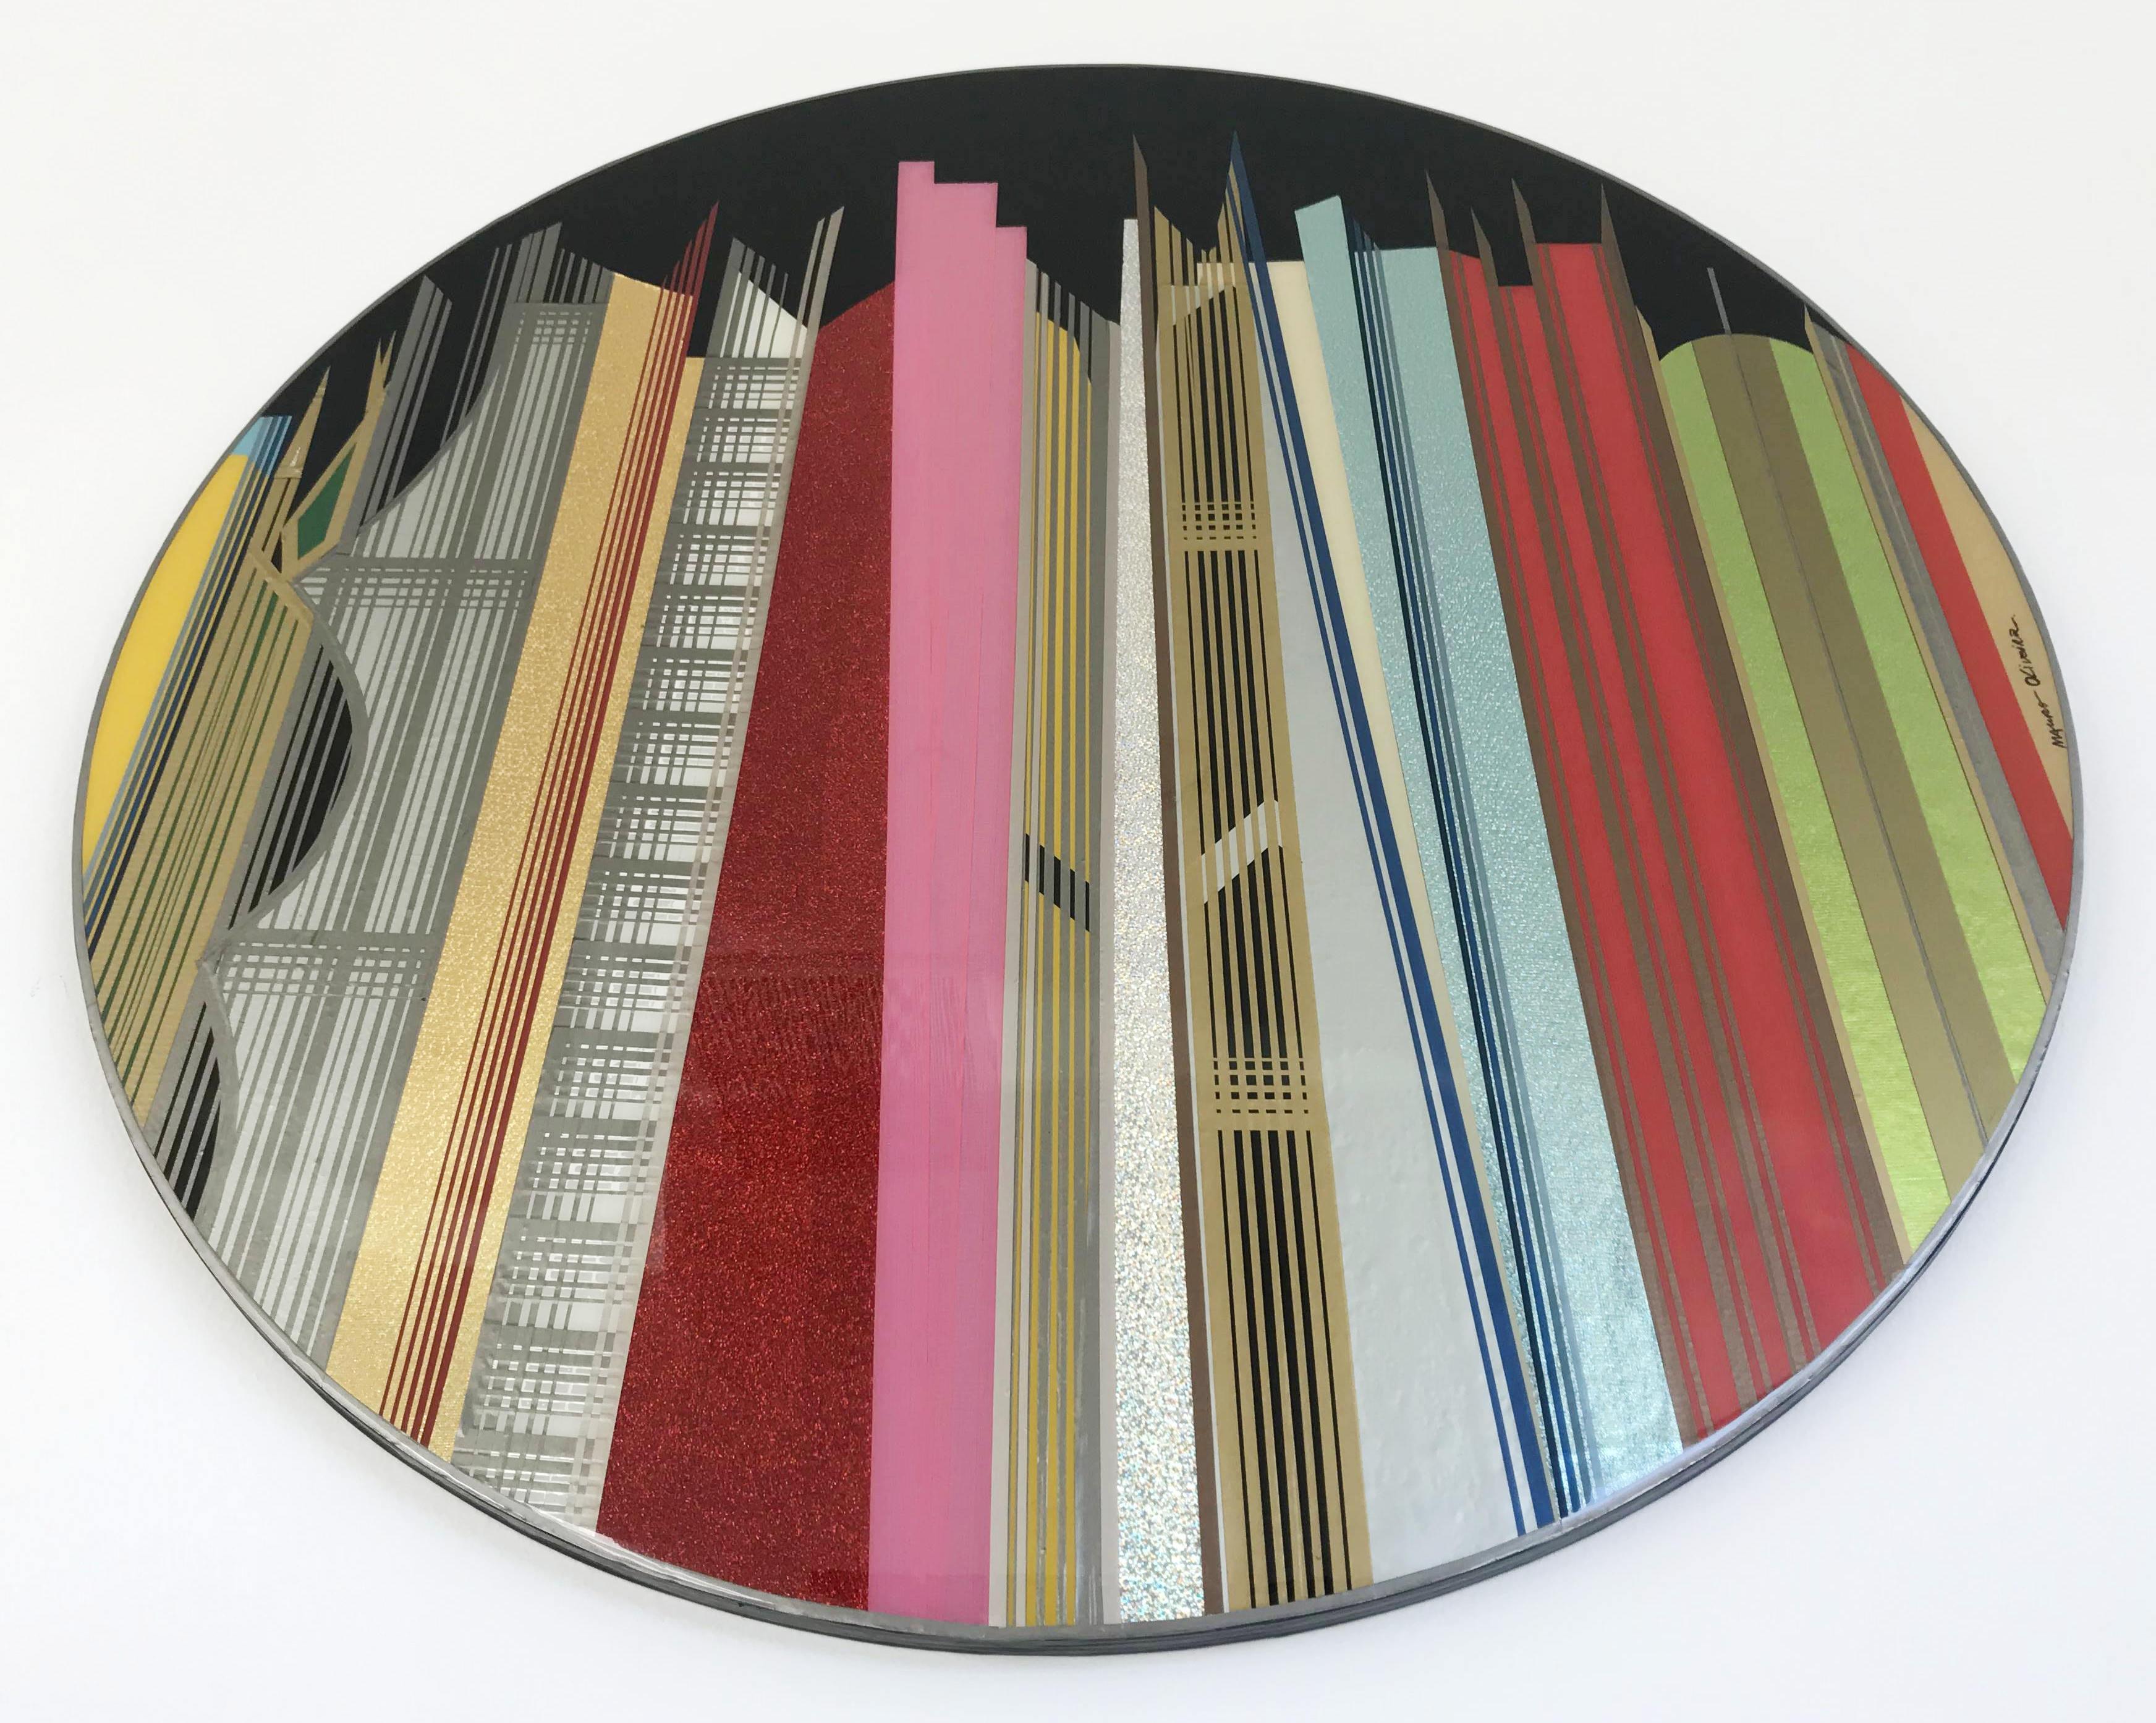 Dubai by Mauro Oliveira, signed. Vinyl tapes, acrylic paint covered with resin on wood frame. A “Certificate of Authenticity” issued by the artist is included. 
Diameter: 36 inches / Depth: 0.75 inch
1 in stock in Palm Springs currently ON 40% OFF